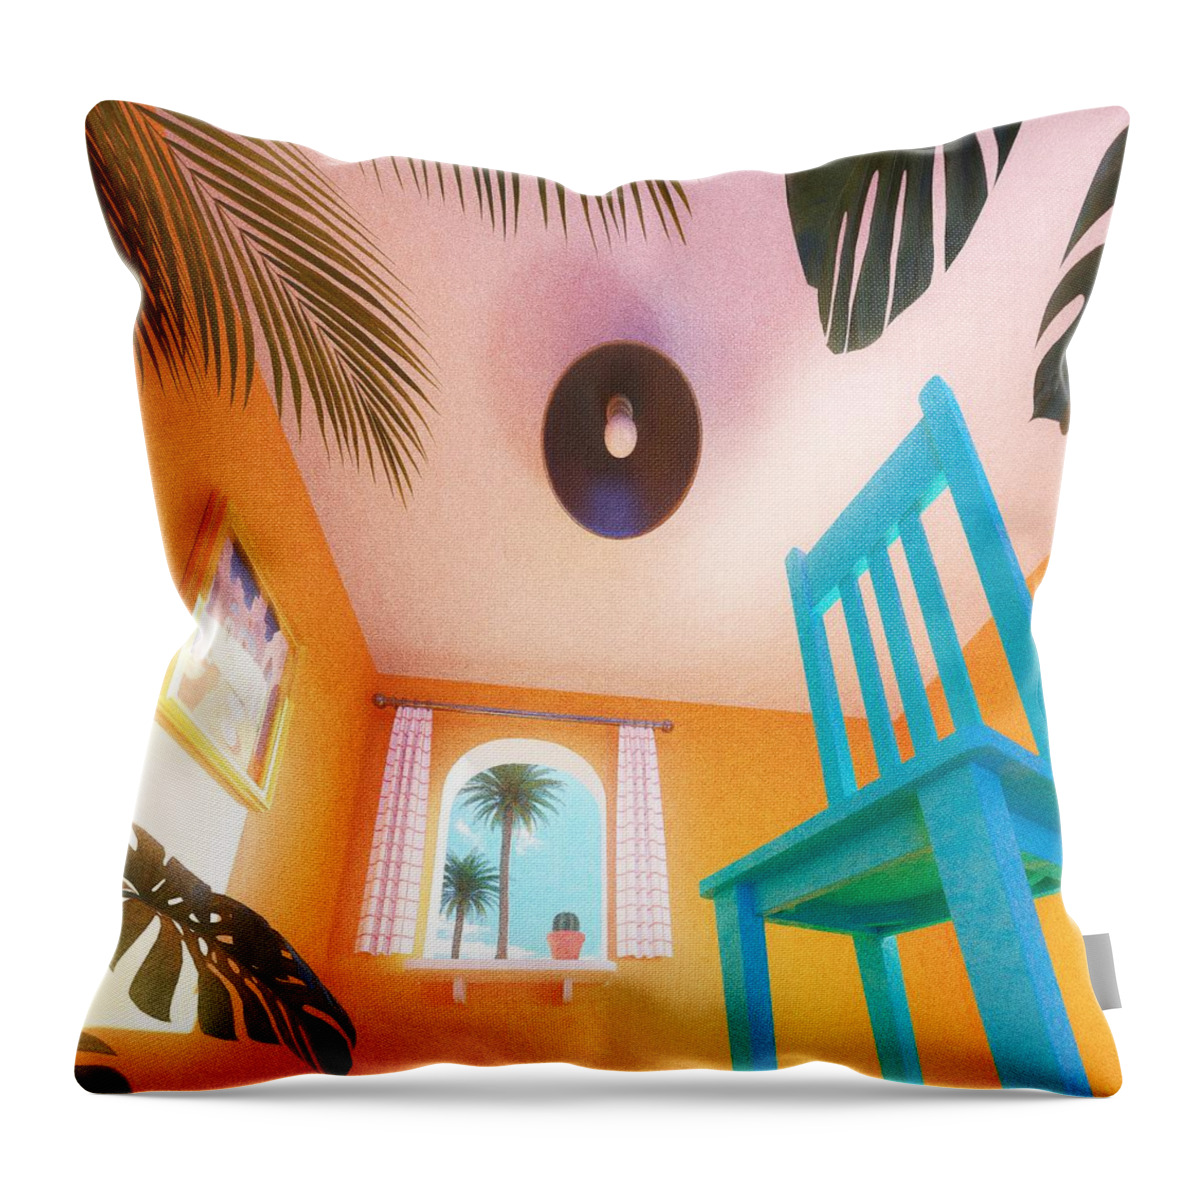 Room Throw Pillow featuring the digital art A tiny morning by Bespoke Cube